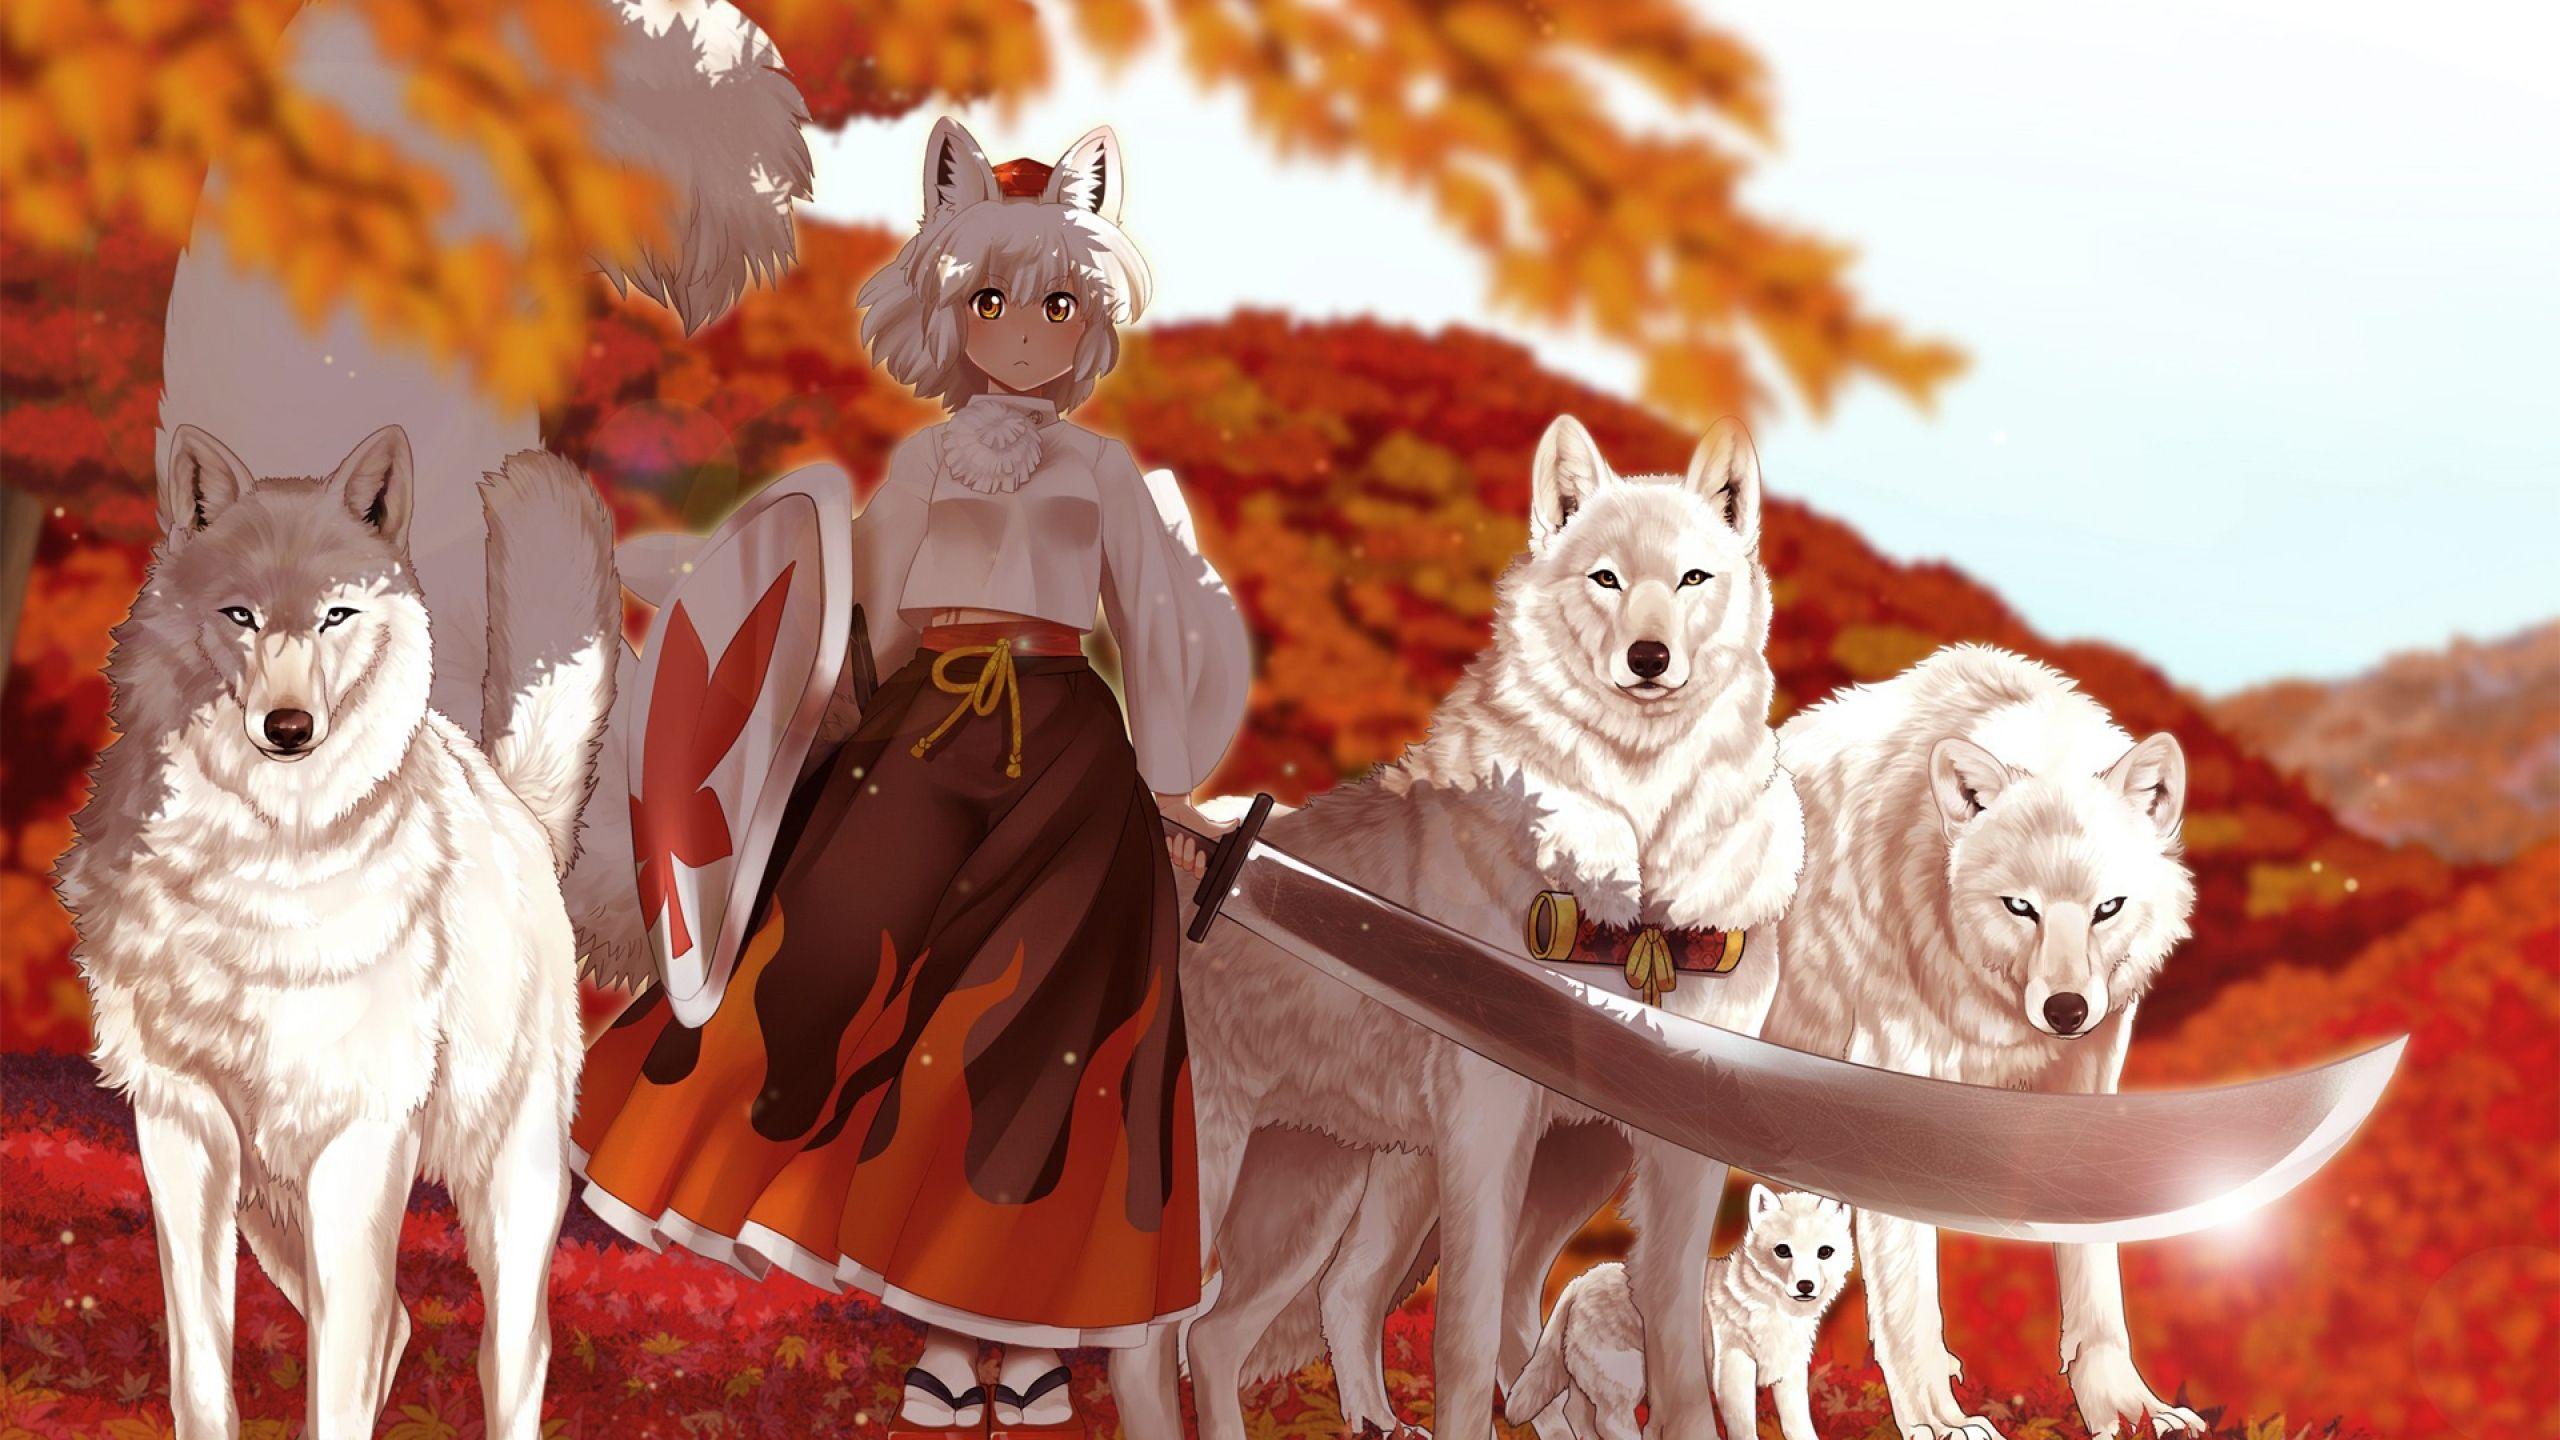 wolf girl with you free english download